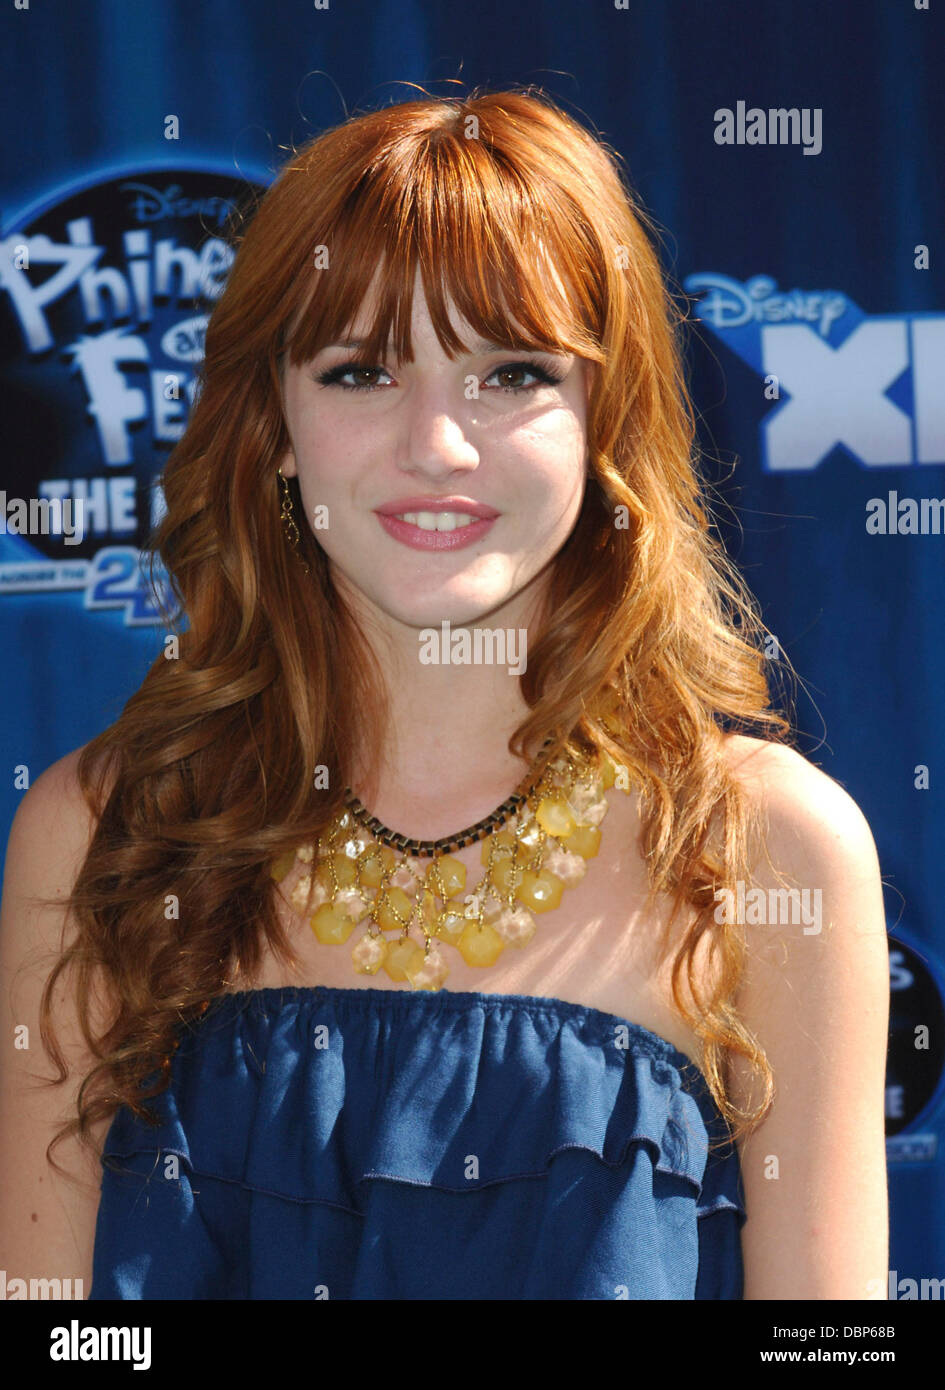 Bella Thorne Hollywood Premiere of the Disney Channel Original Movie,  "Phineas and Ferb: Across the 2nd Dimension" held at the El Capital Theatre  Hollywood, California - 03.08.11 Stock Photo - Alamy